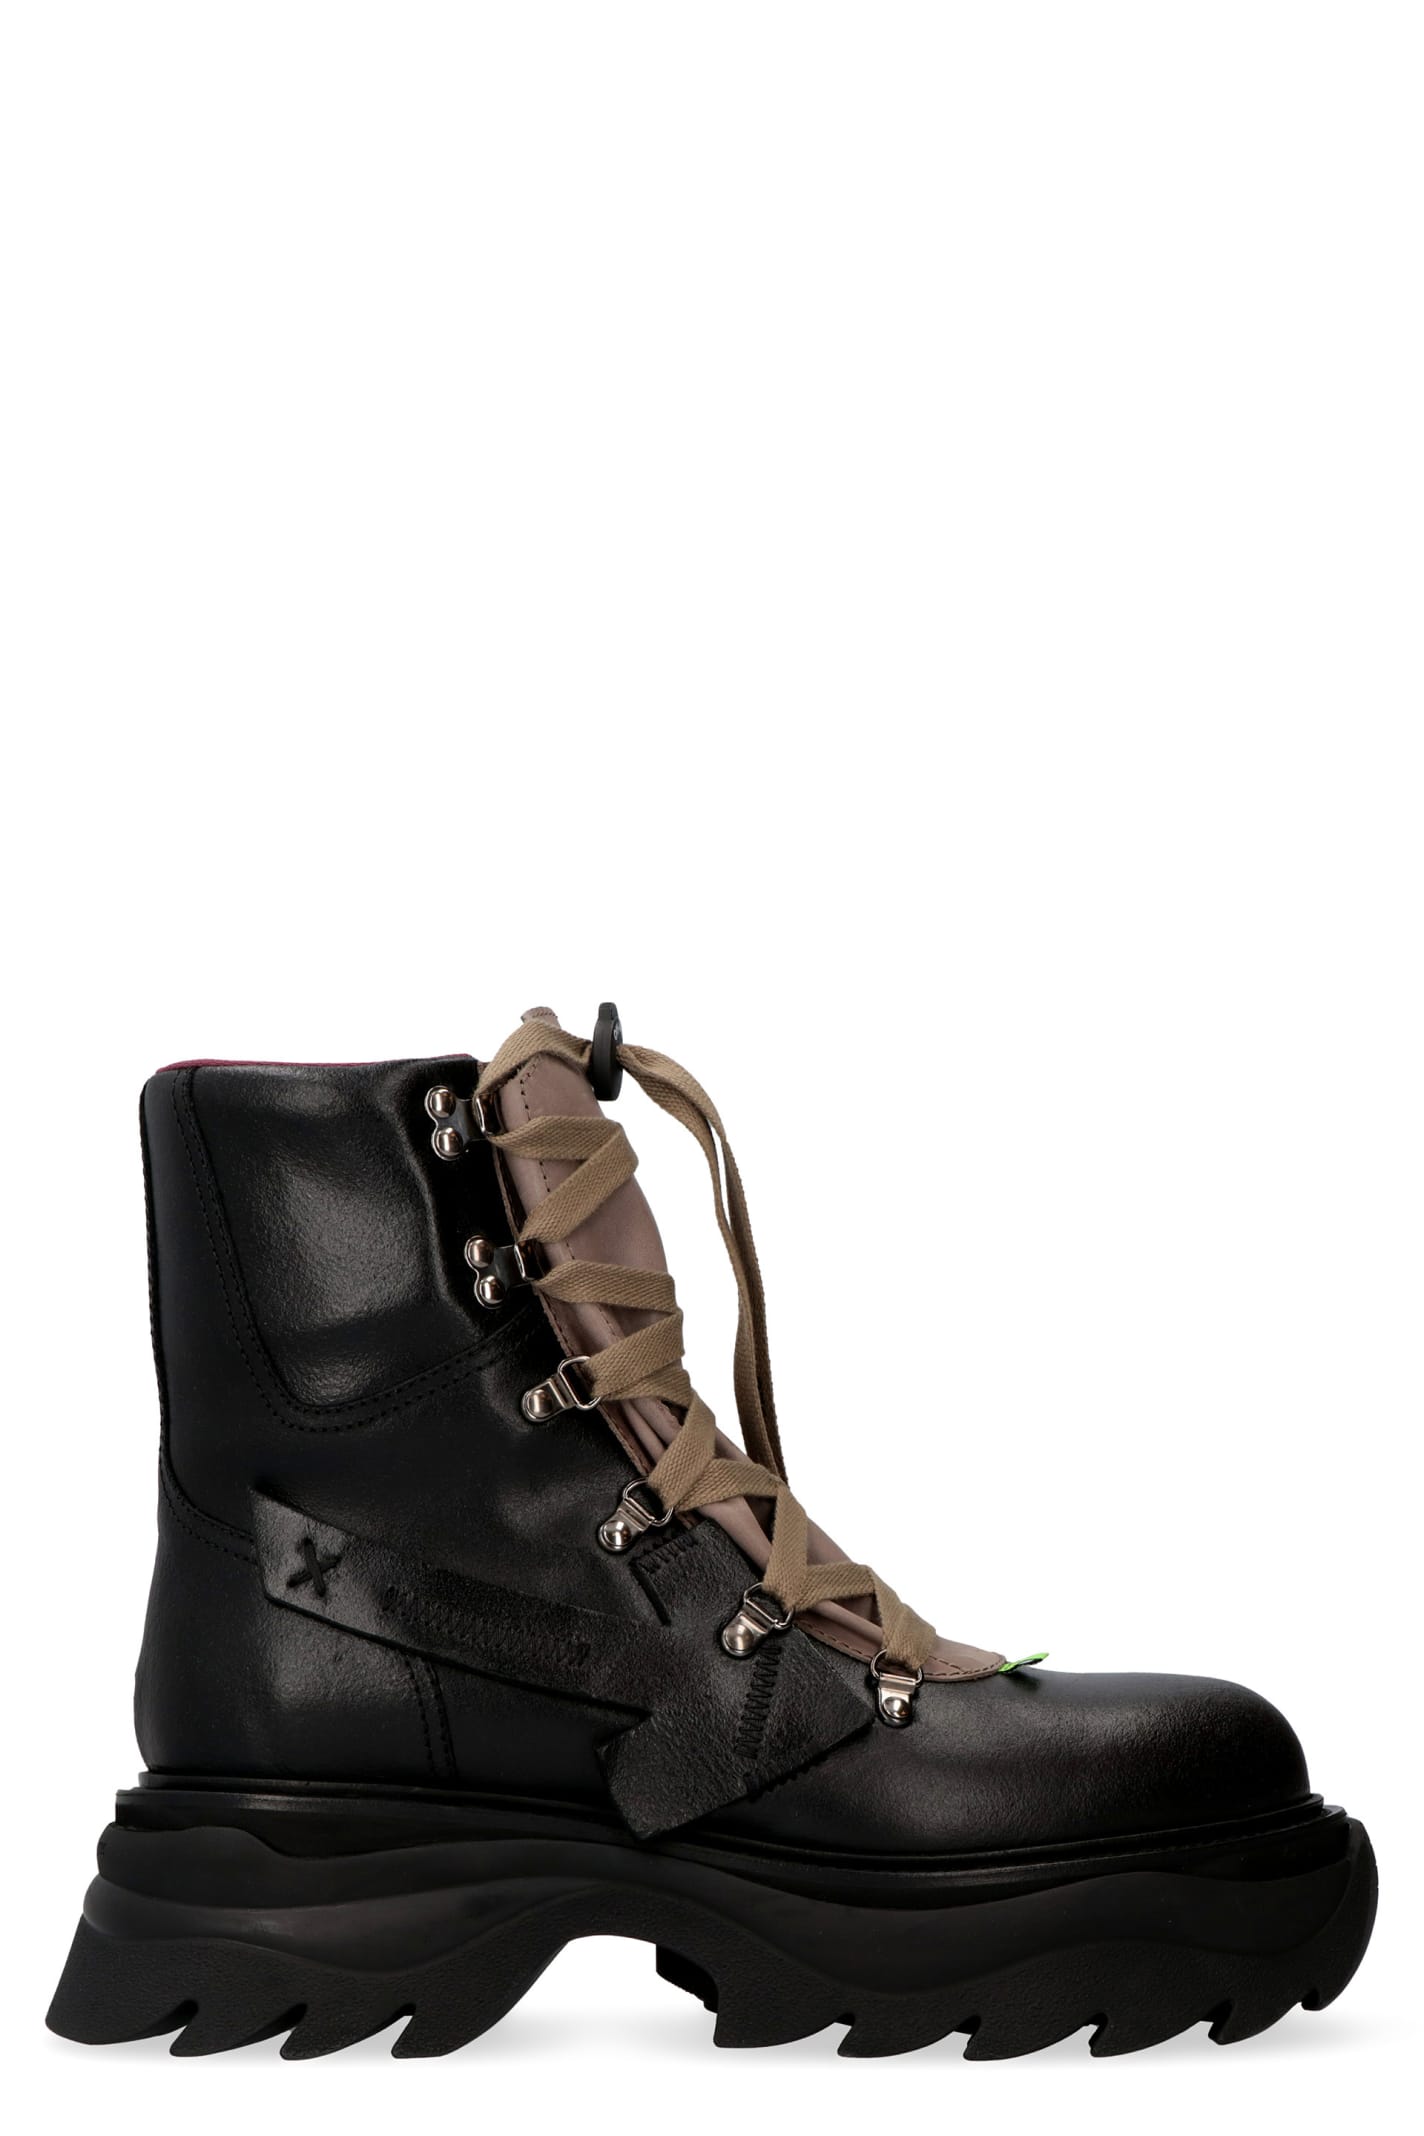 Off-White Leather Lace-up Boots